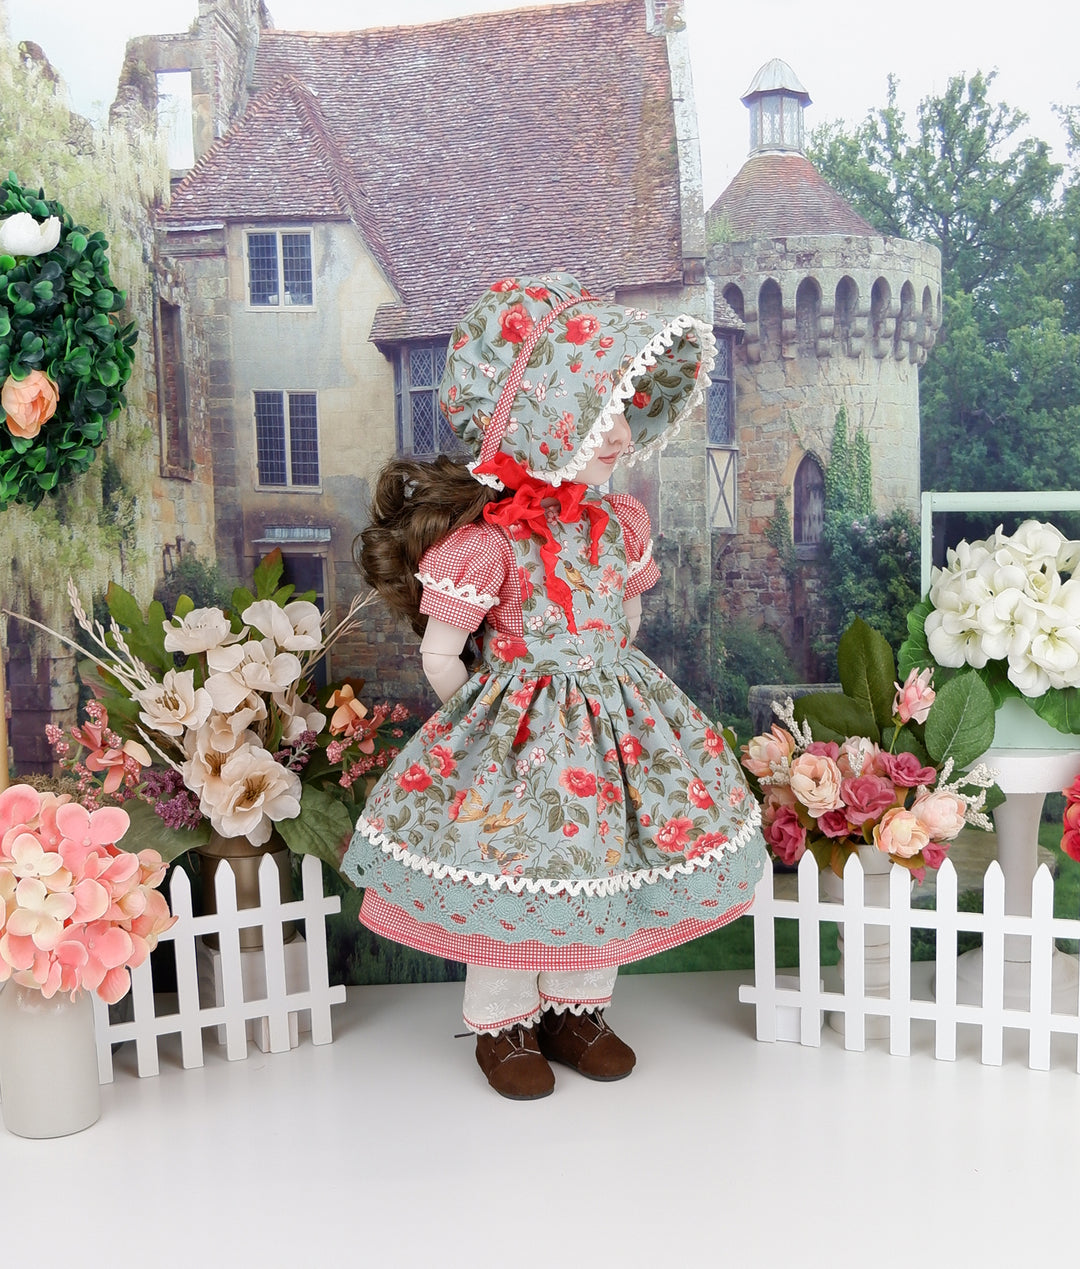 Country Wren - dress, bonnet & apron with boots for Ruby Red Fashion Friends doll